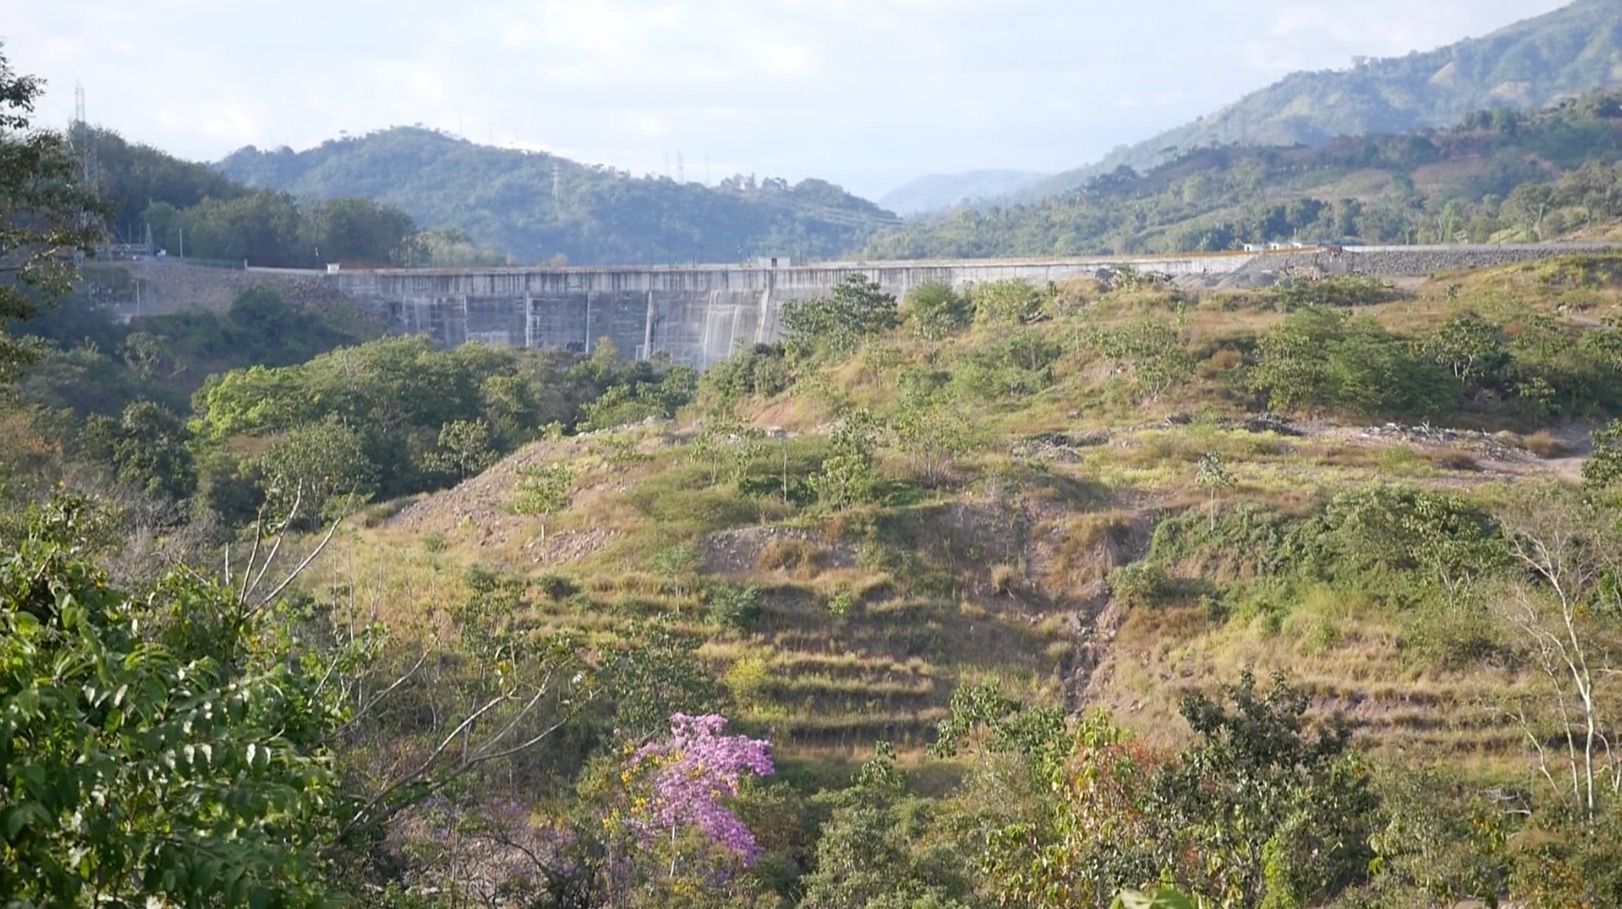 The Barro Blanco hydroelectric dam has flooded land of the Ngöbe-Buglé people in Panama. Image by Daniel Grossman. Panama, 2017.